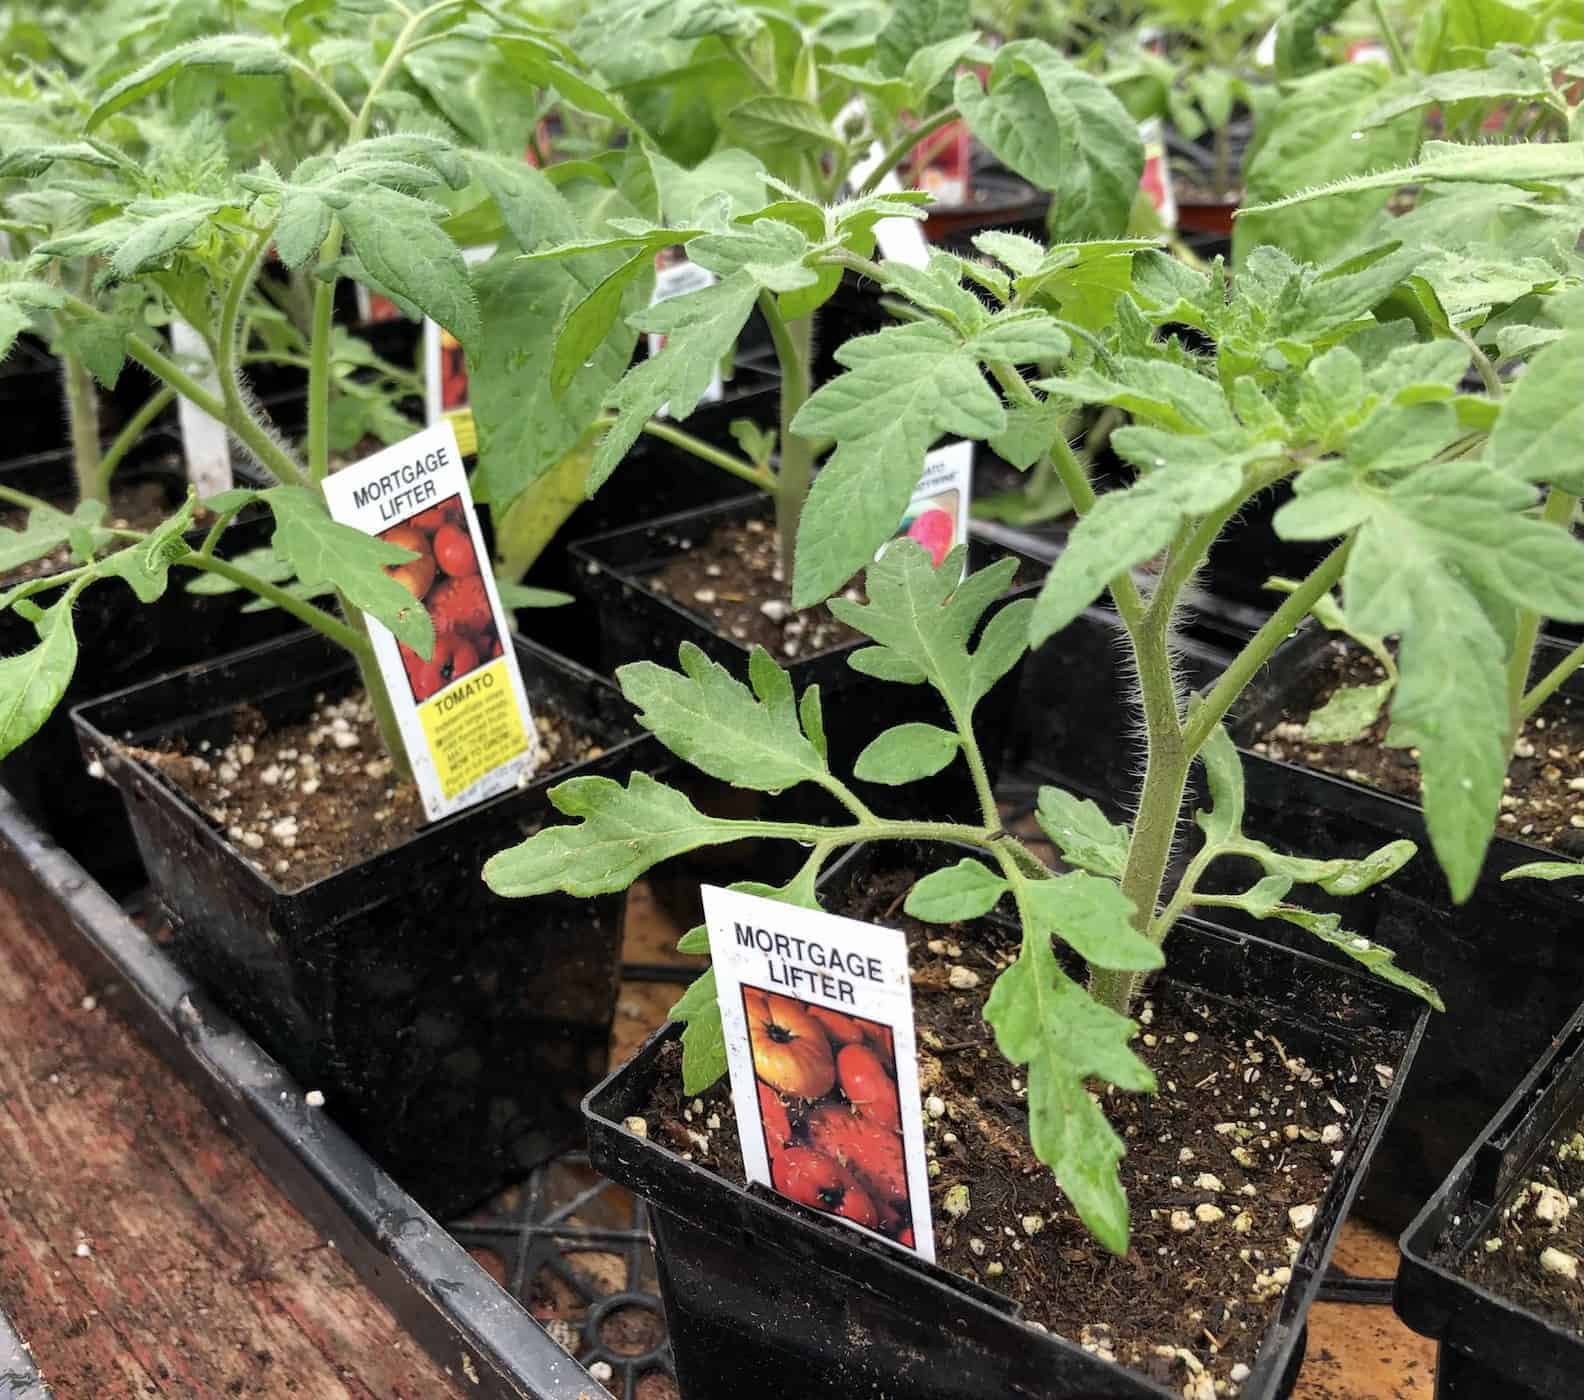 Mortgage lifter tomato plants at the garden center